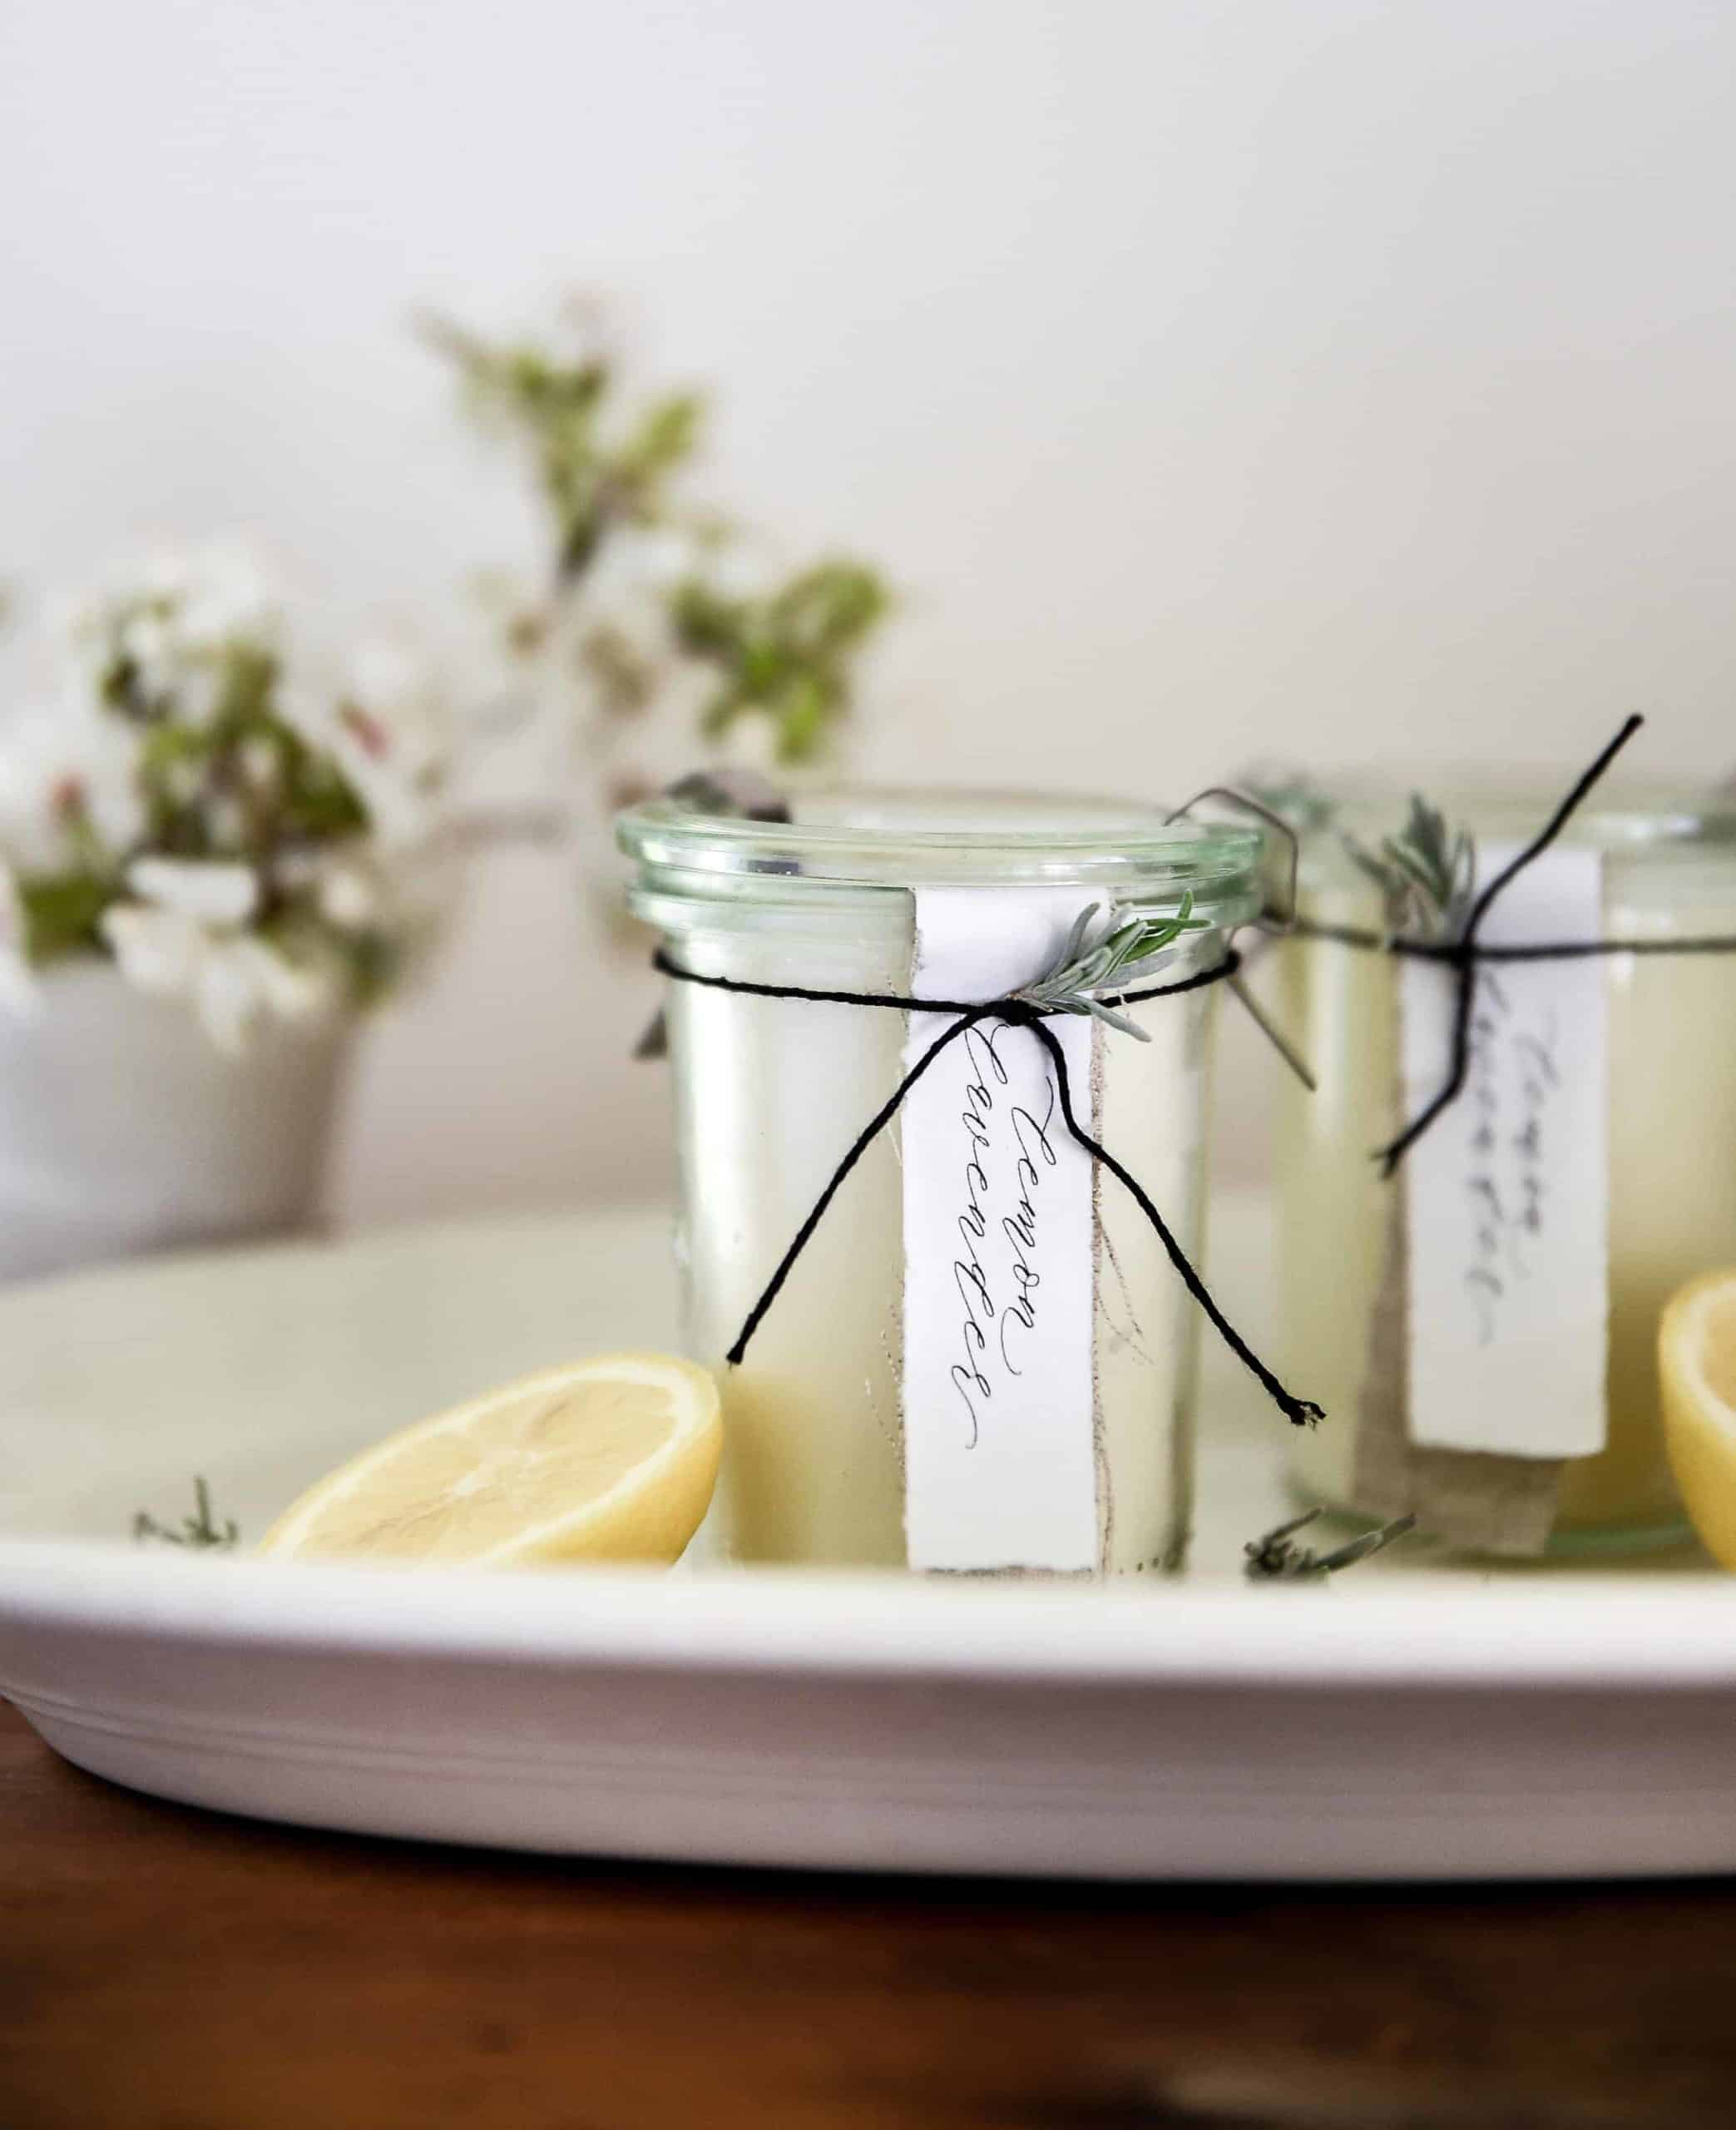 Learn how to make homemade candles with essential oils! This is a great DIY candle recipe using lavender and lemon essential oils!